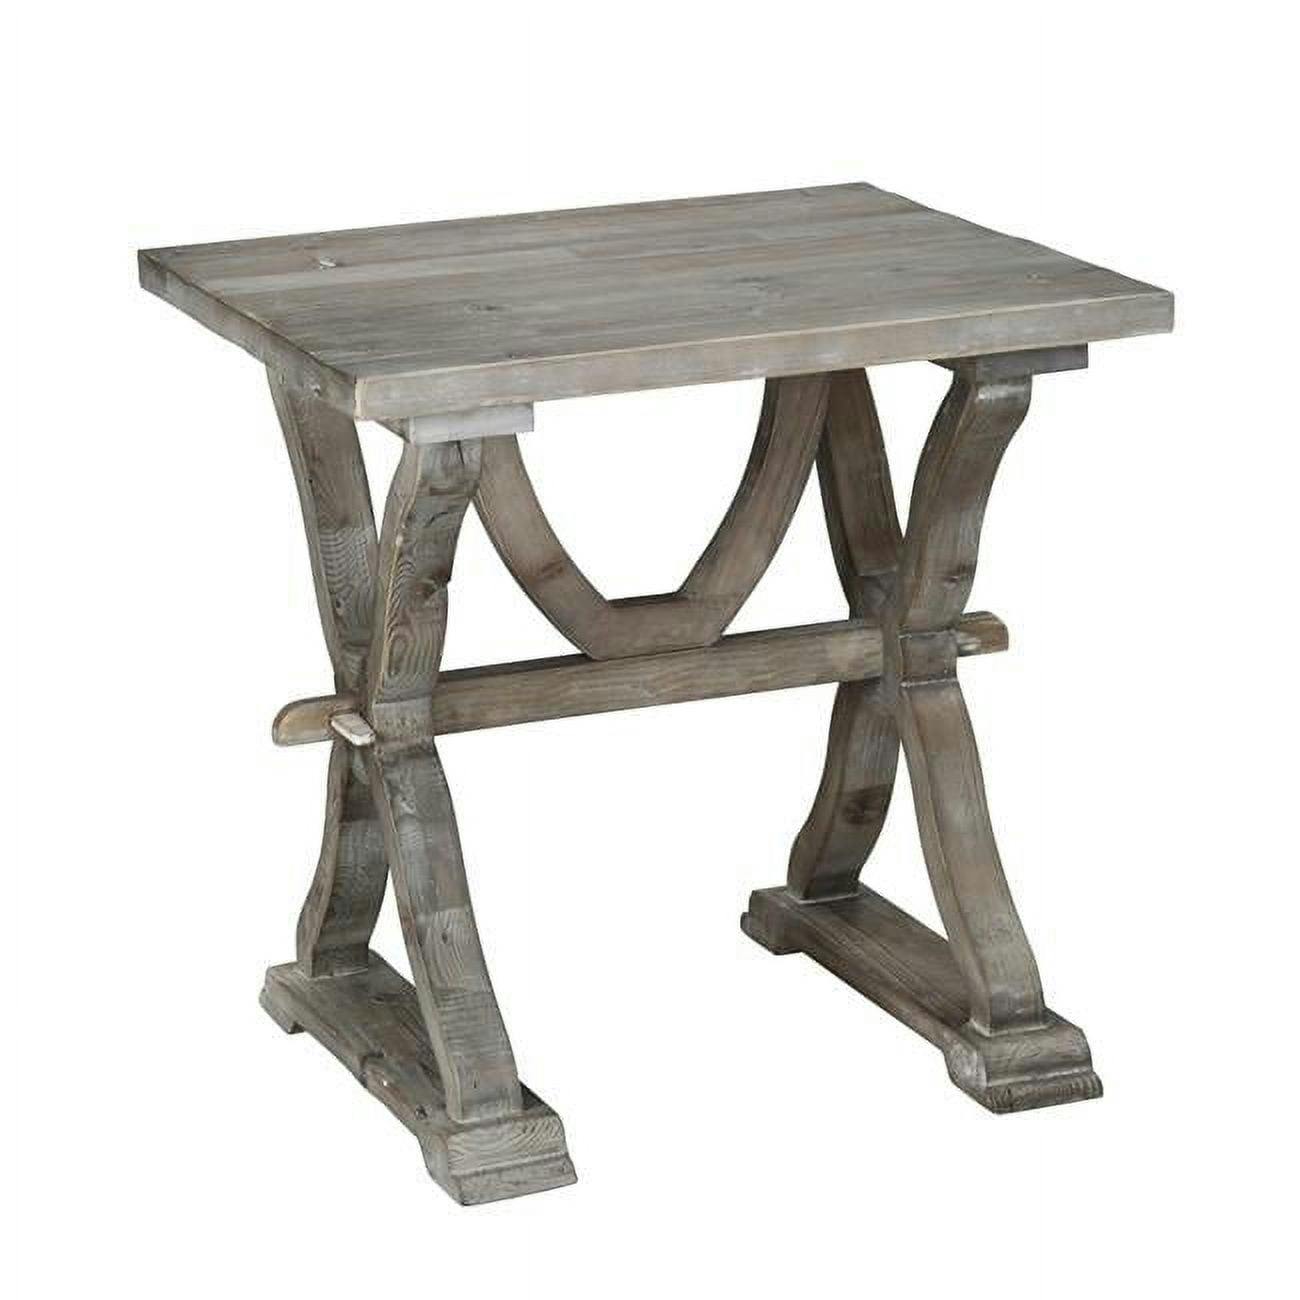 Elegant Farmhouse Colette Side Table in White Wash Reclaimed Wood